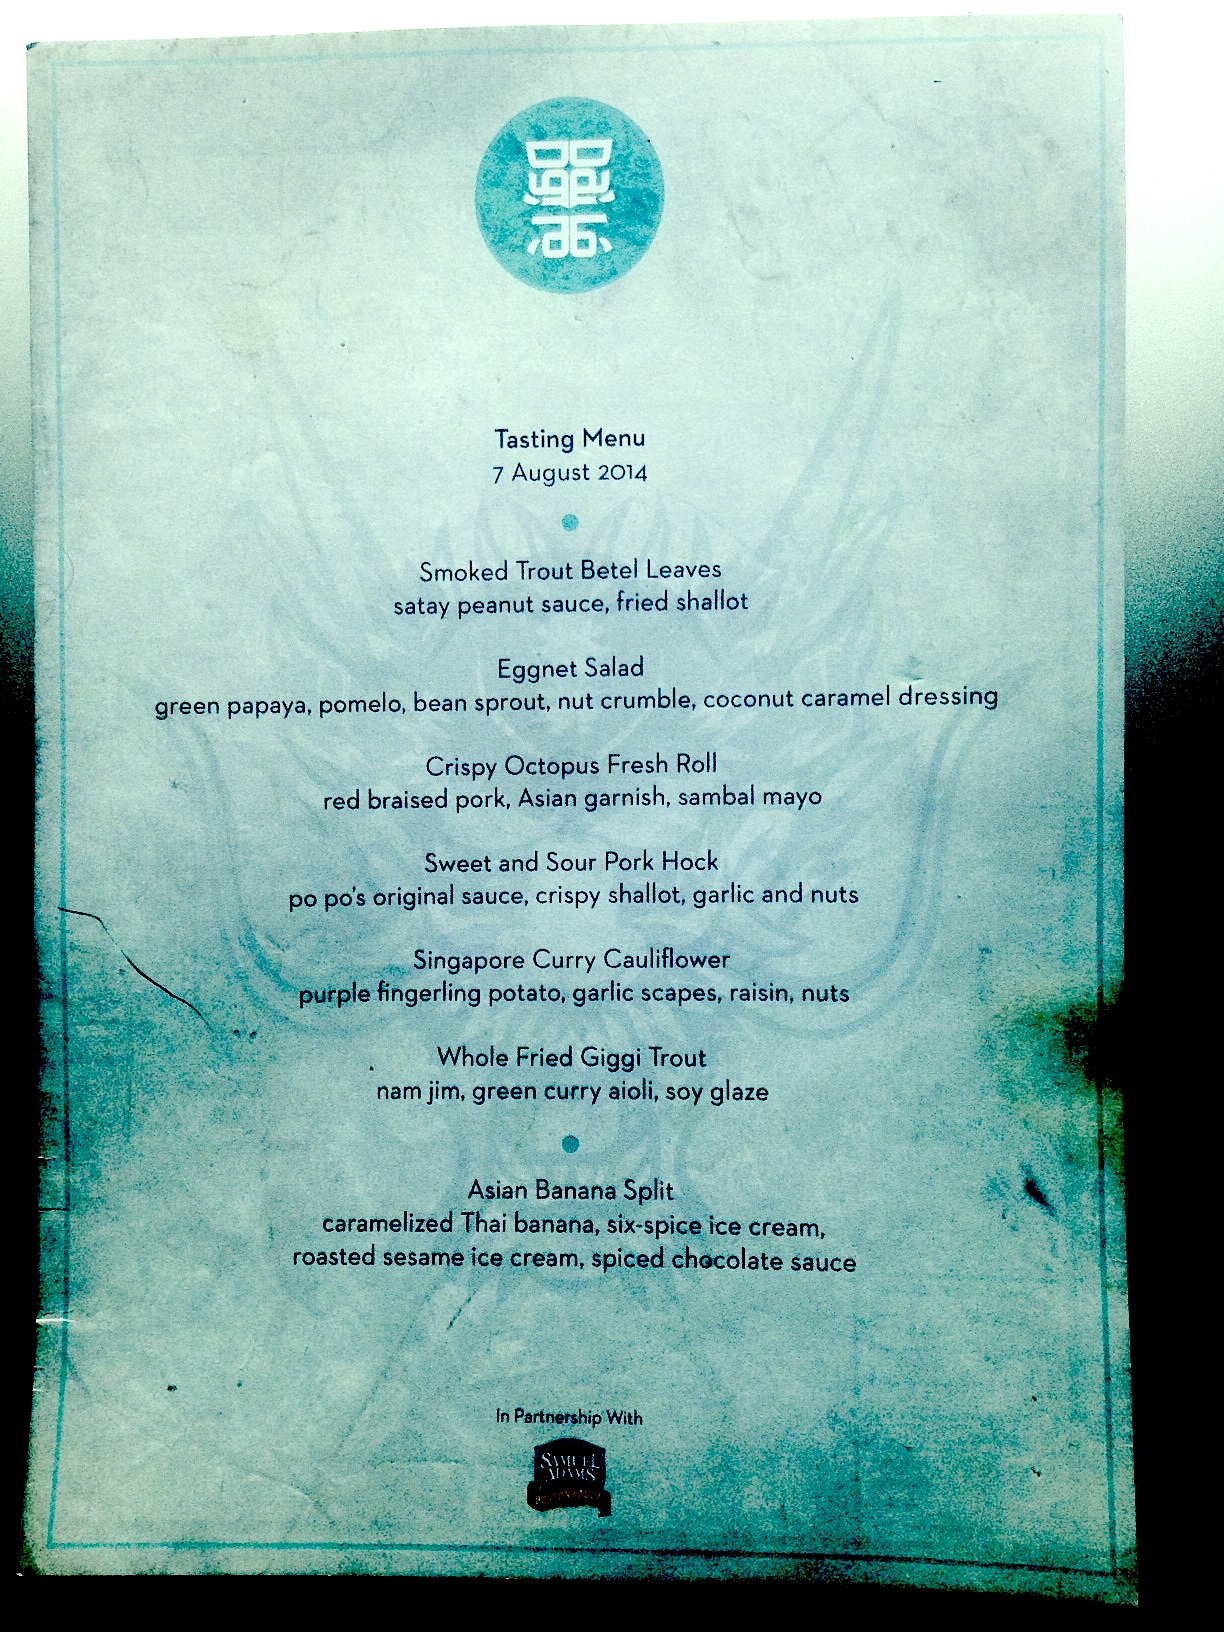 A DaiLo menu from the media preview (with a large grease stain at right).